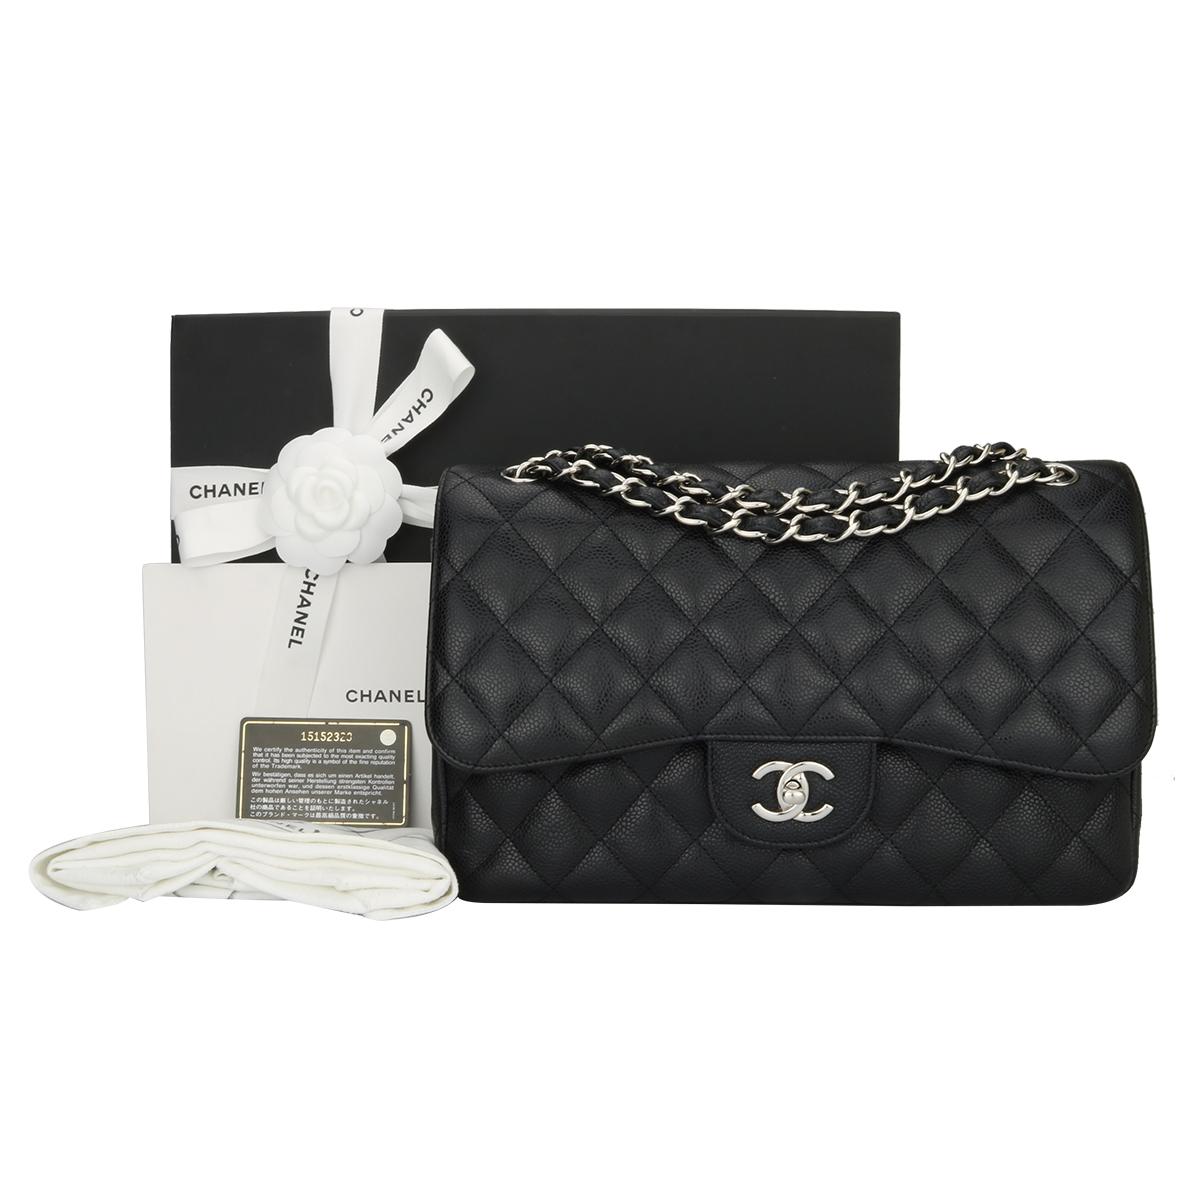 Authentic CHANEL Classic Jumbo Double Flap Black Caviar with Silver Hardware 2011.

This stunning bag is in an excellent condition, the bag still holds its original shape, and the hardware is still very shiny.

Exterior Condition: Excellent